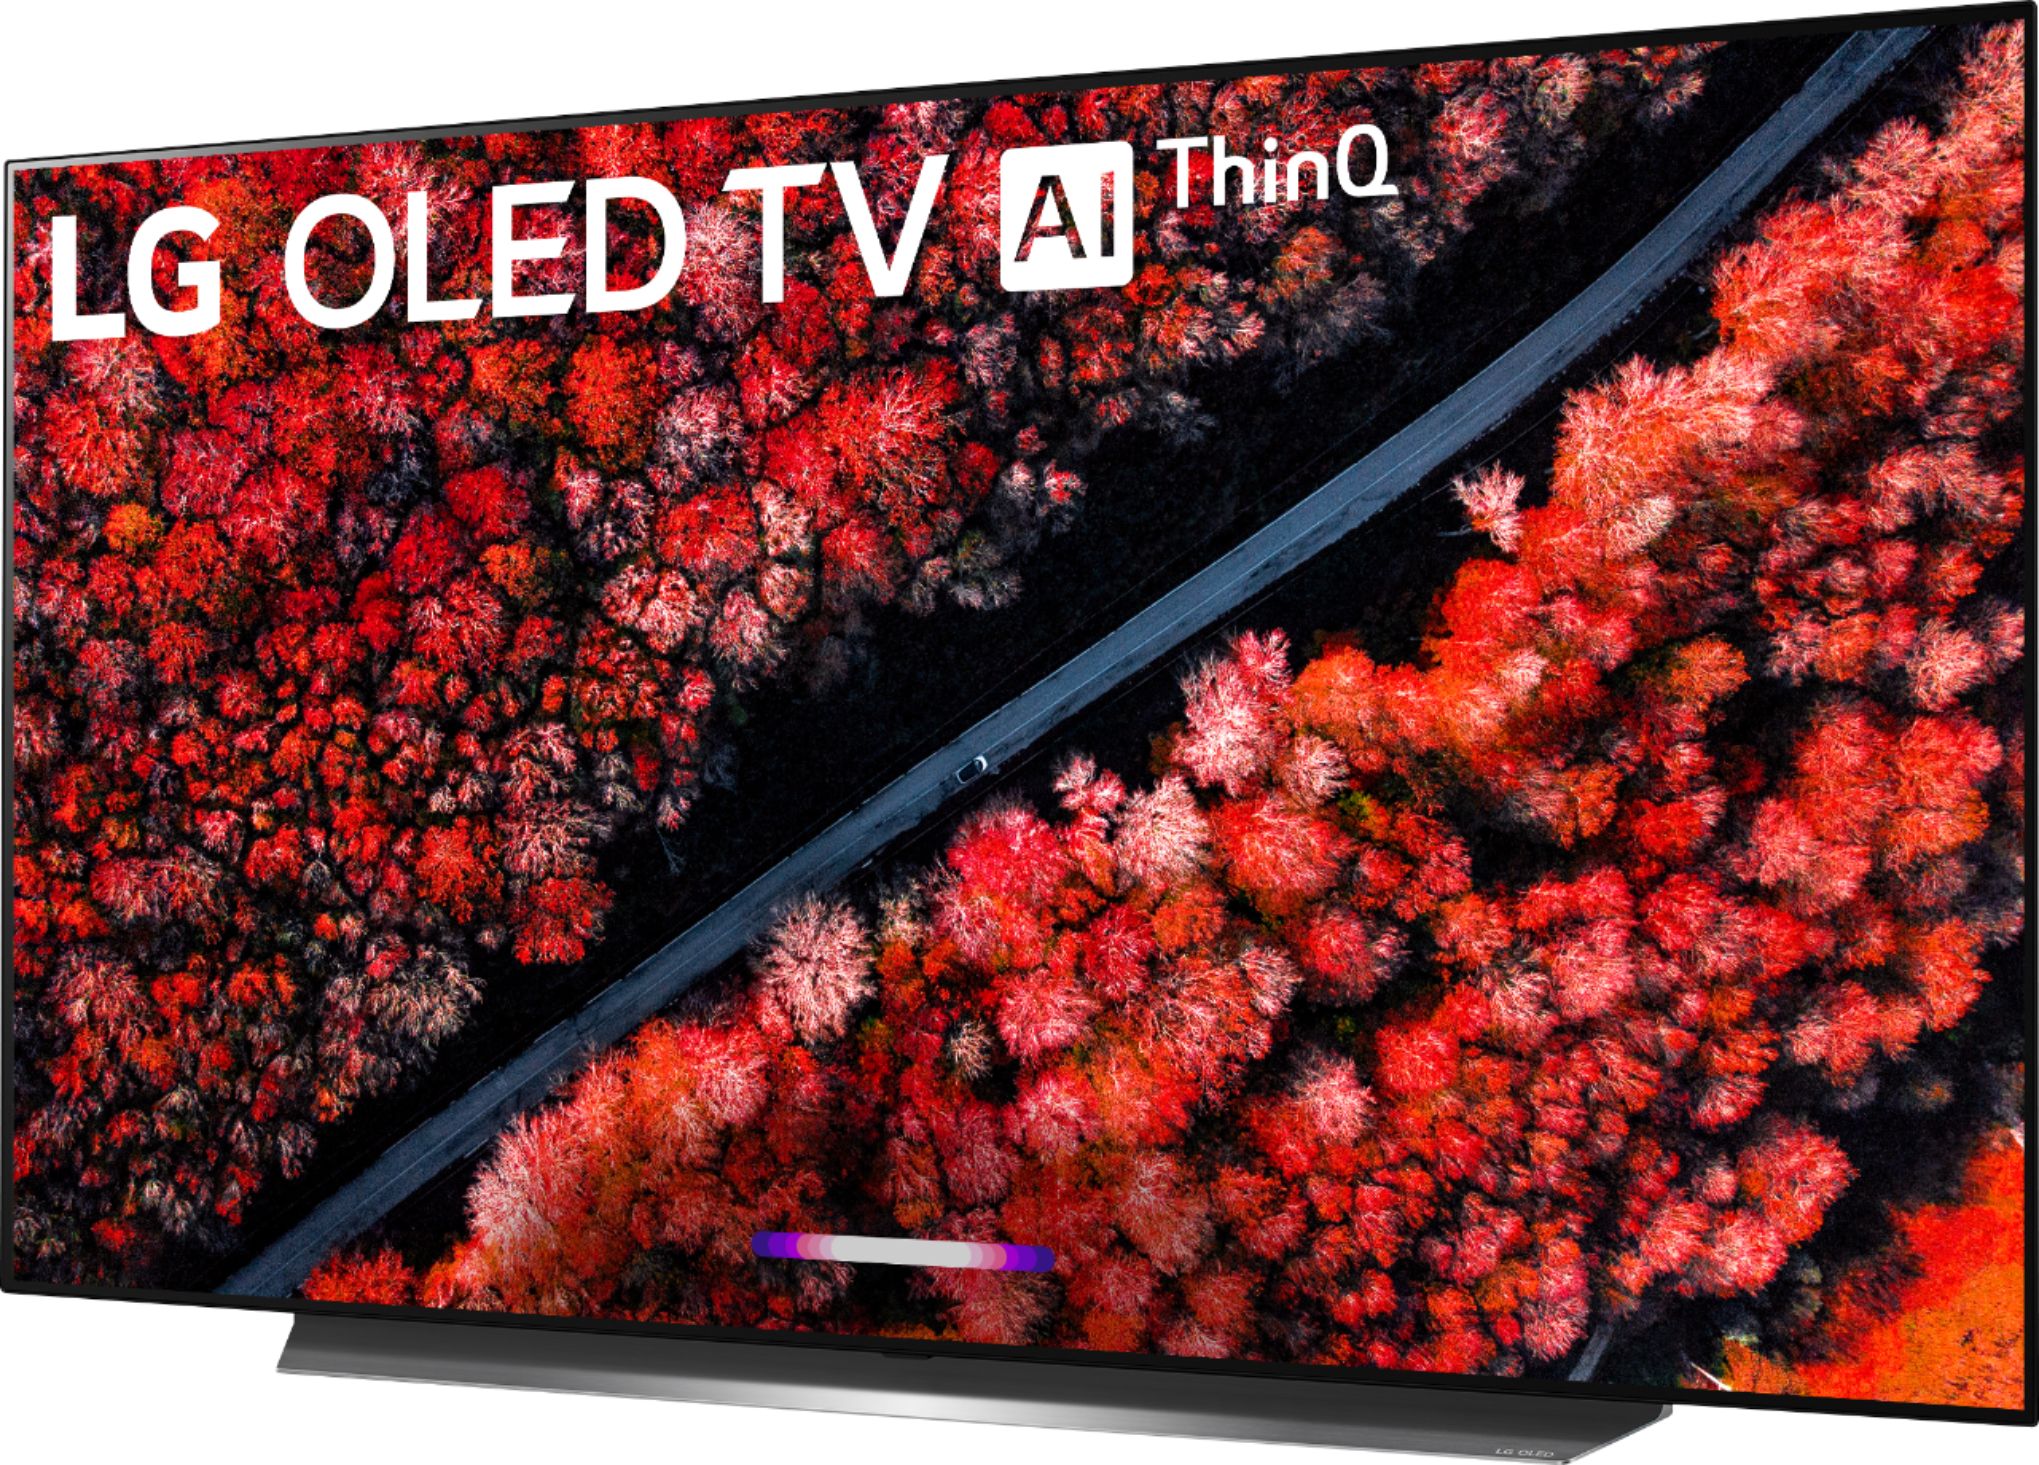 This is the best time in a decade to splurge on a premium OLED TV